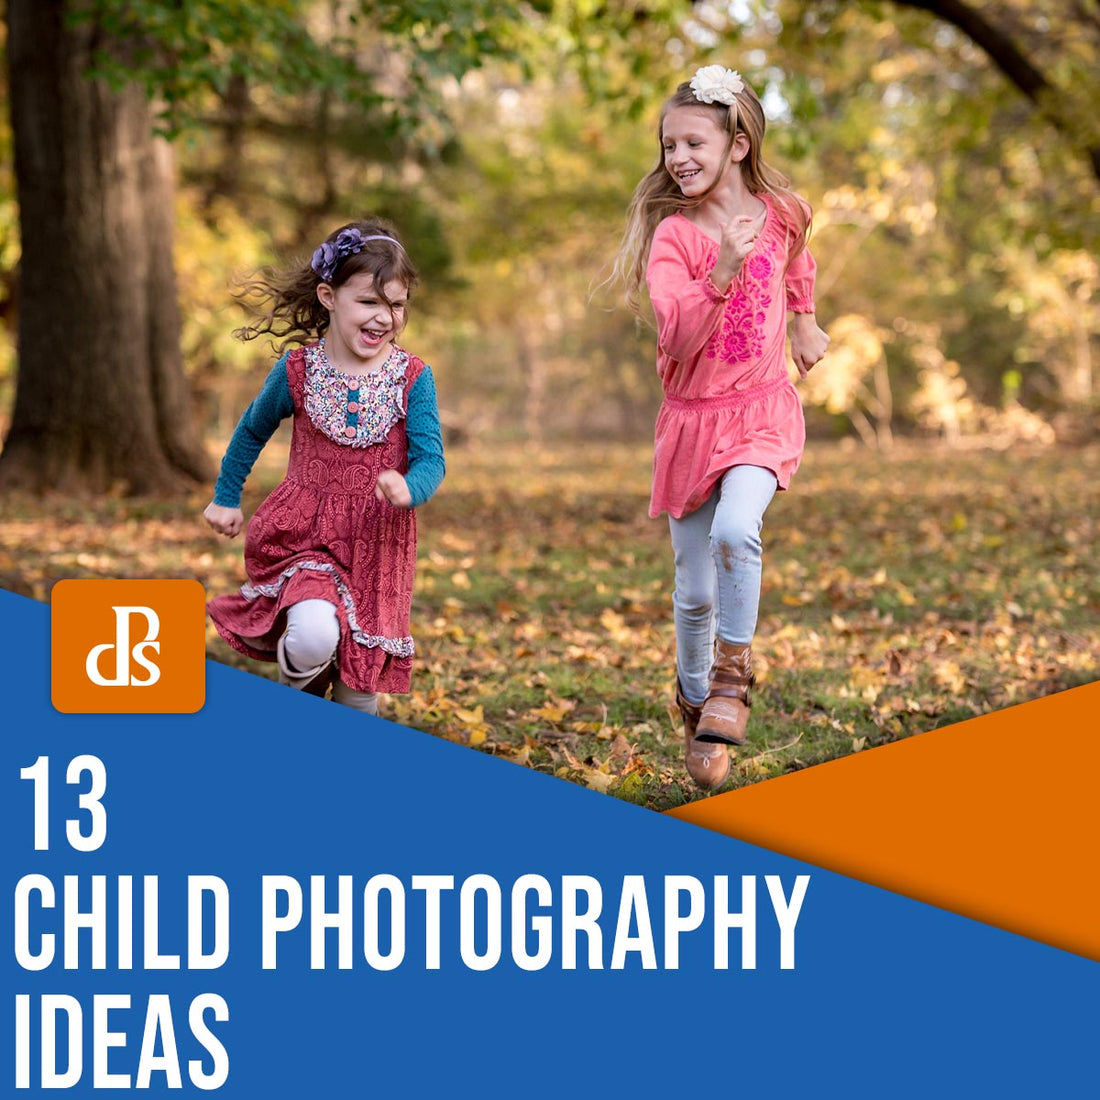 13 Child Photography Ideas to Get Your Creative Juices Flowing